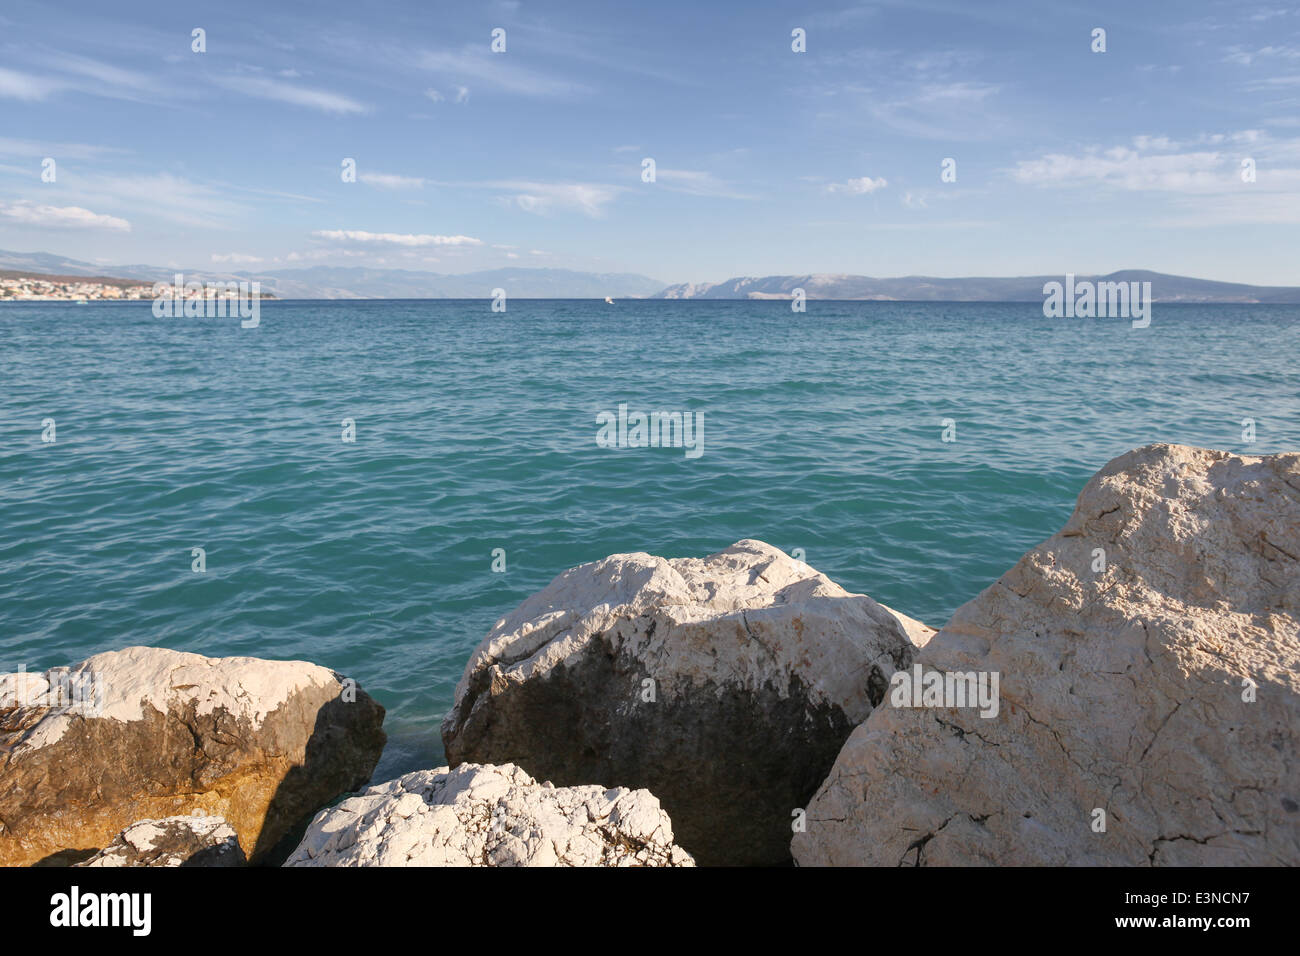 Croatian landscape with boulders, Adriatic Sea and mountains, seen from the beach in Crikvenica. Focus on the boulders Stock Photo